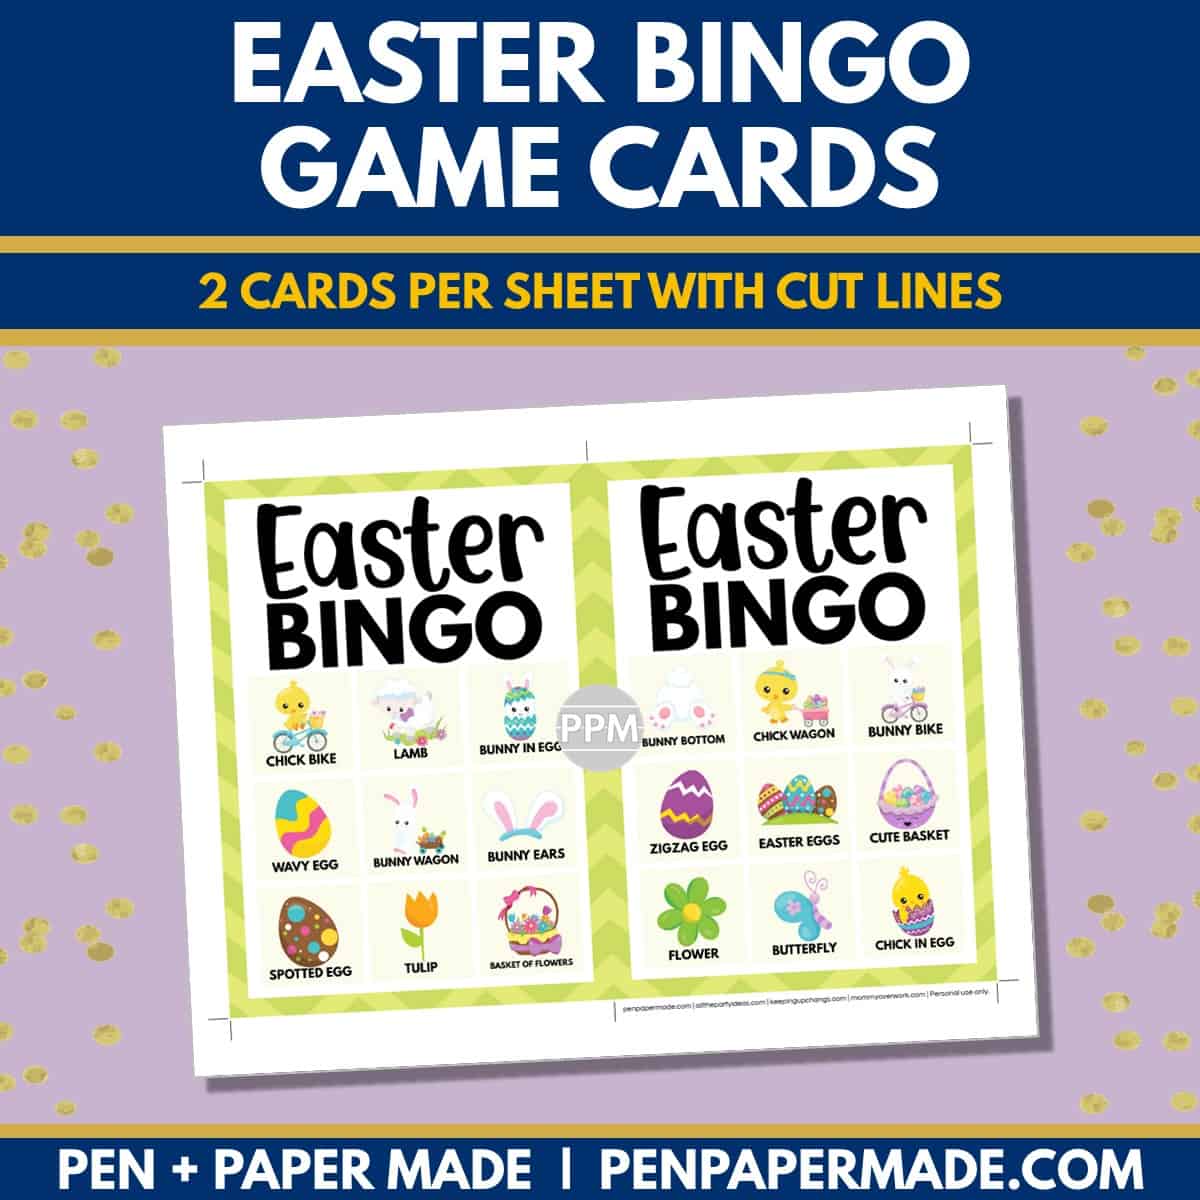 easter bingo card 3x3 5x7 game boards with images and text words.